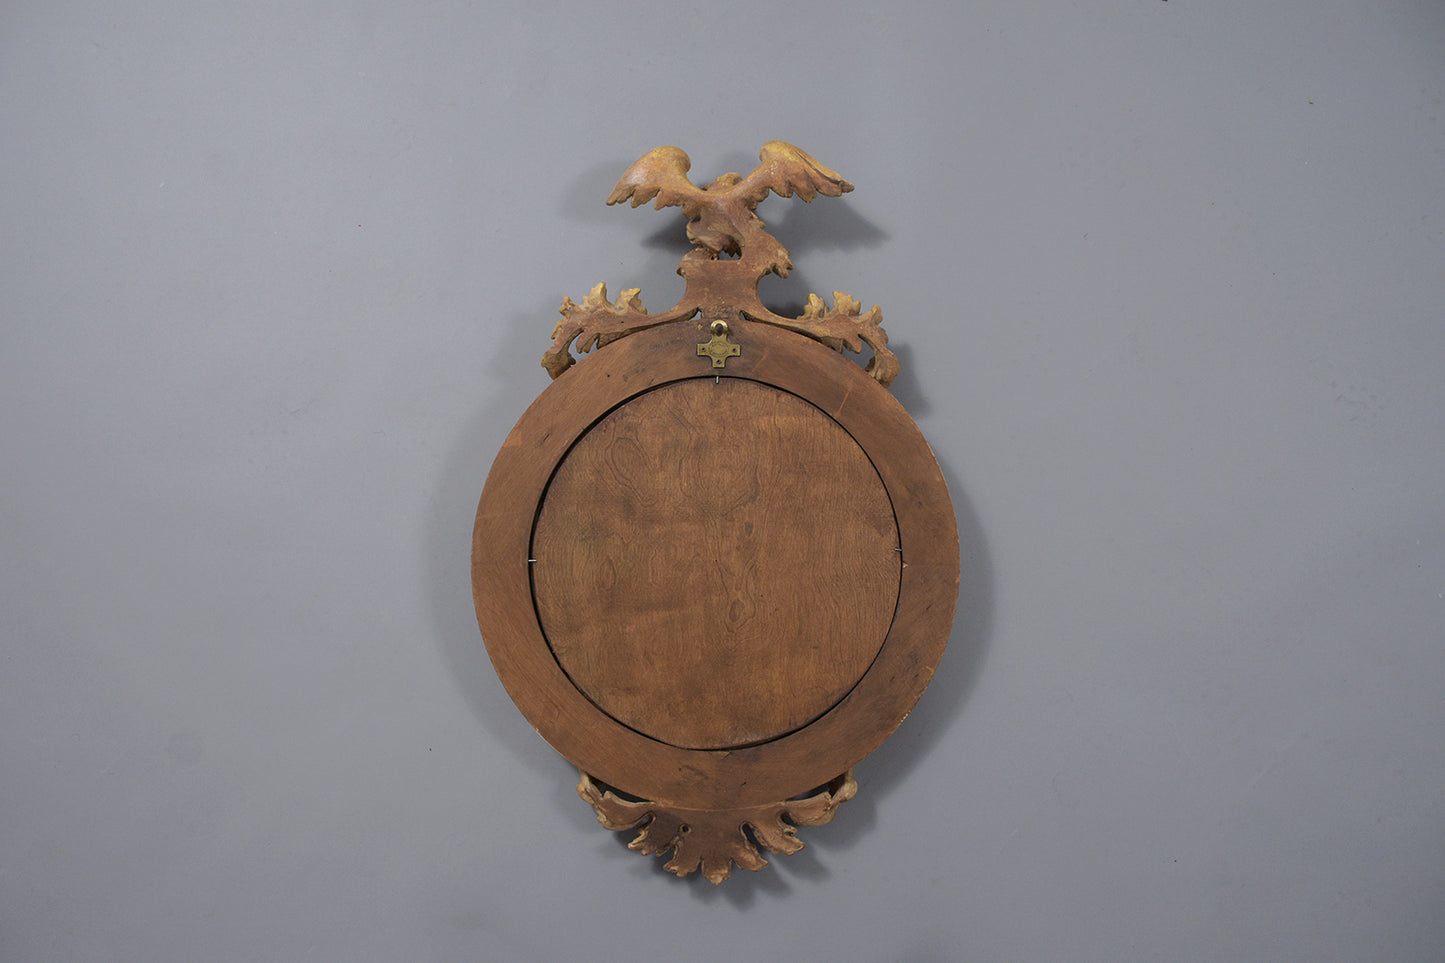 Vintage Italian American Federal-Style Oval Mirror with Eagle Motif